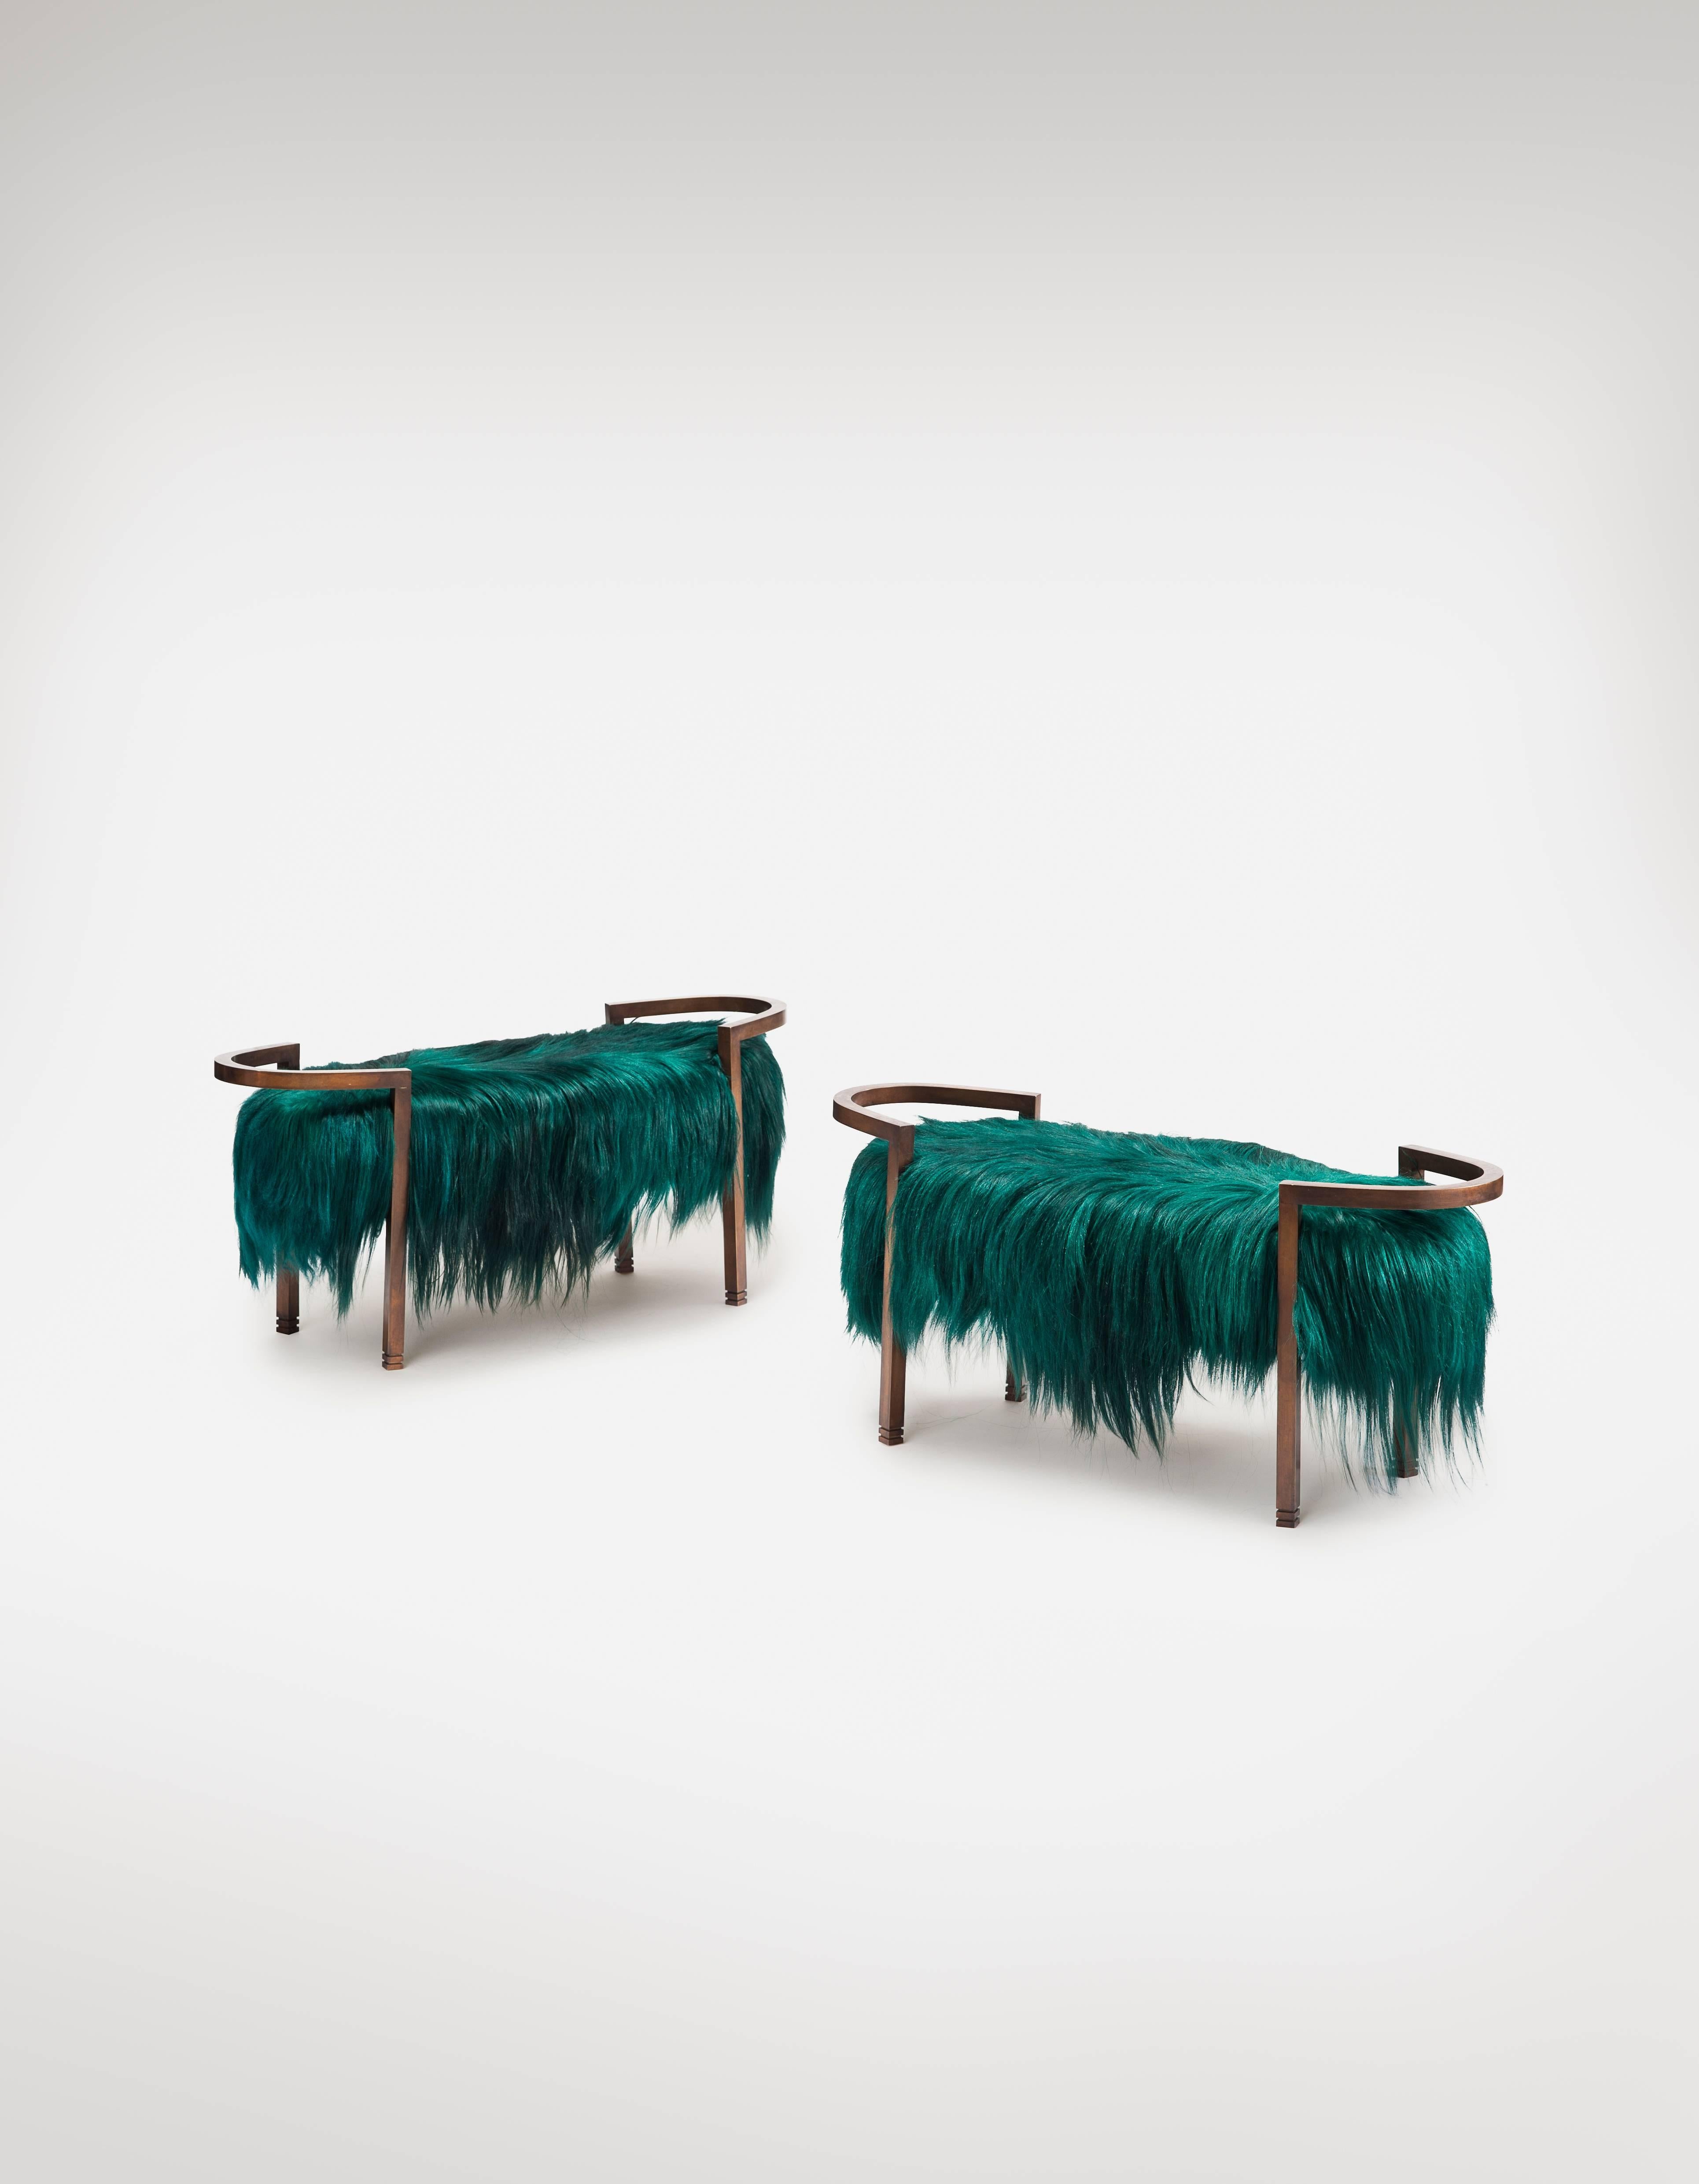 Patinated bronze and upholstery

Measures: H 45cm x W 104cm x D 35cm 

Edition: 50 
Shown: Green or black Kidassia upholstery

Custom Kidassia color +£850 ex VAT
Note: As the fur is dyed there may be variations in tones

